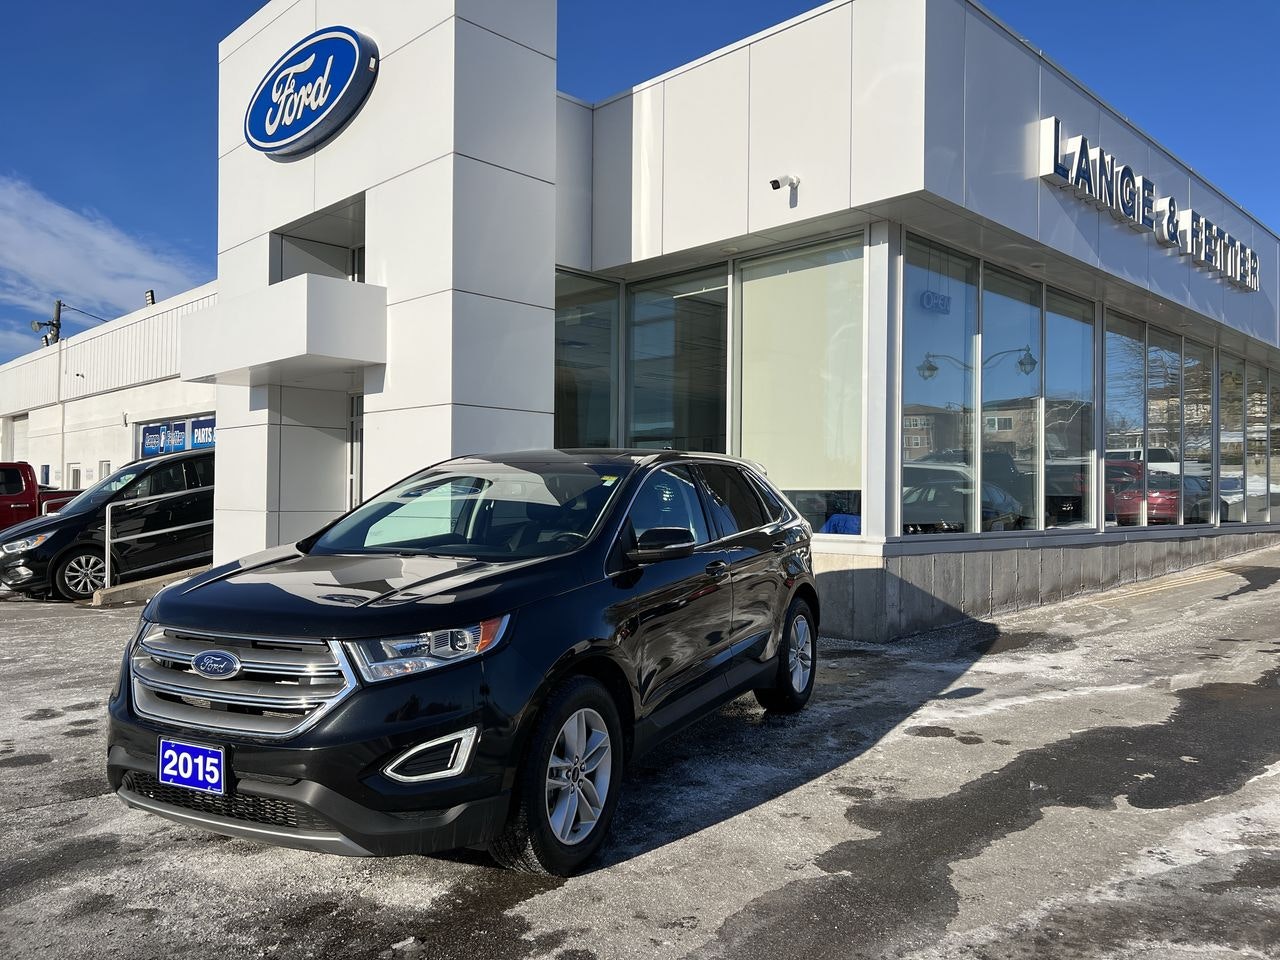 2015 Ford Edge - P20785A Full Image 1